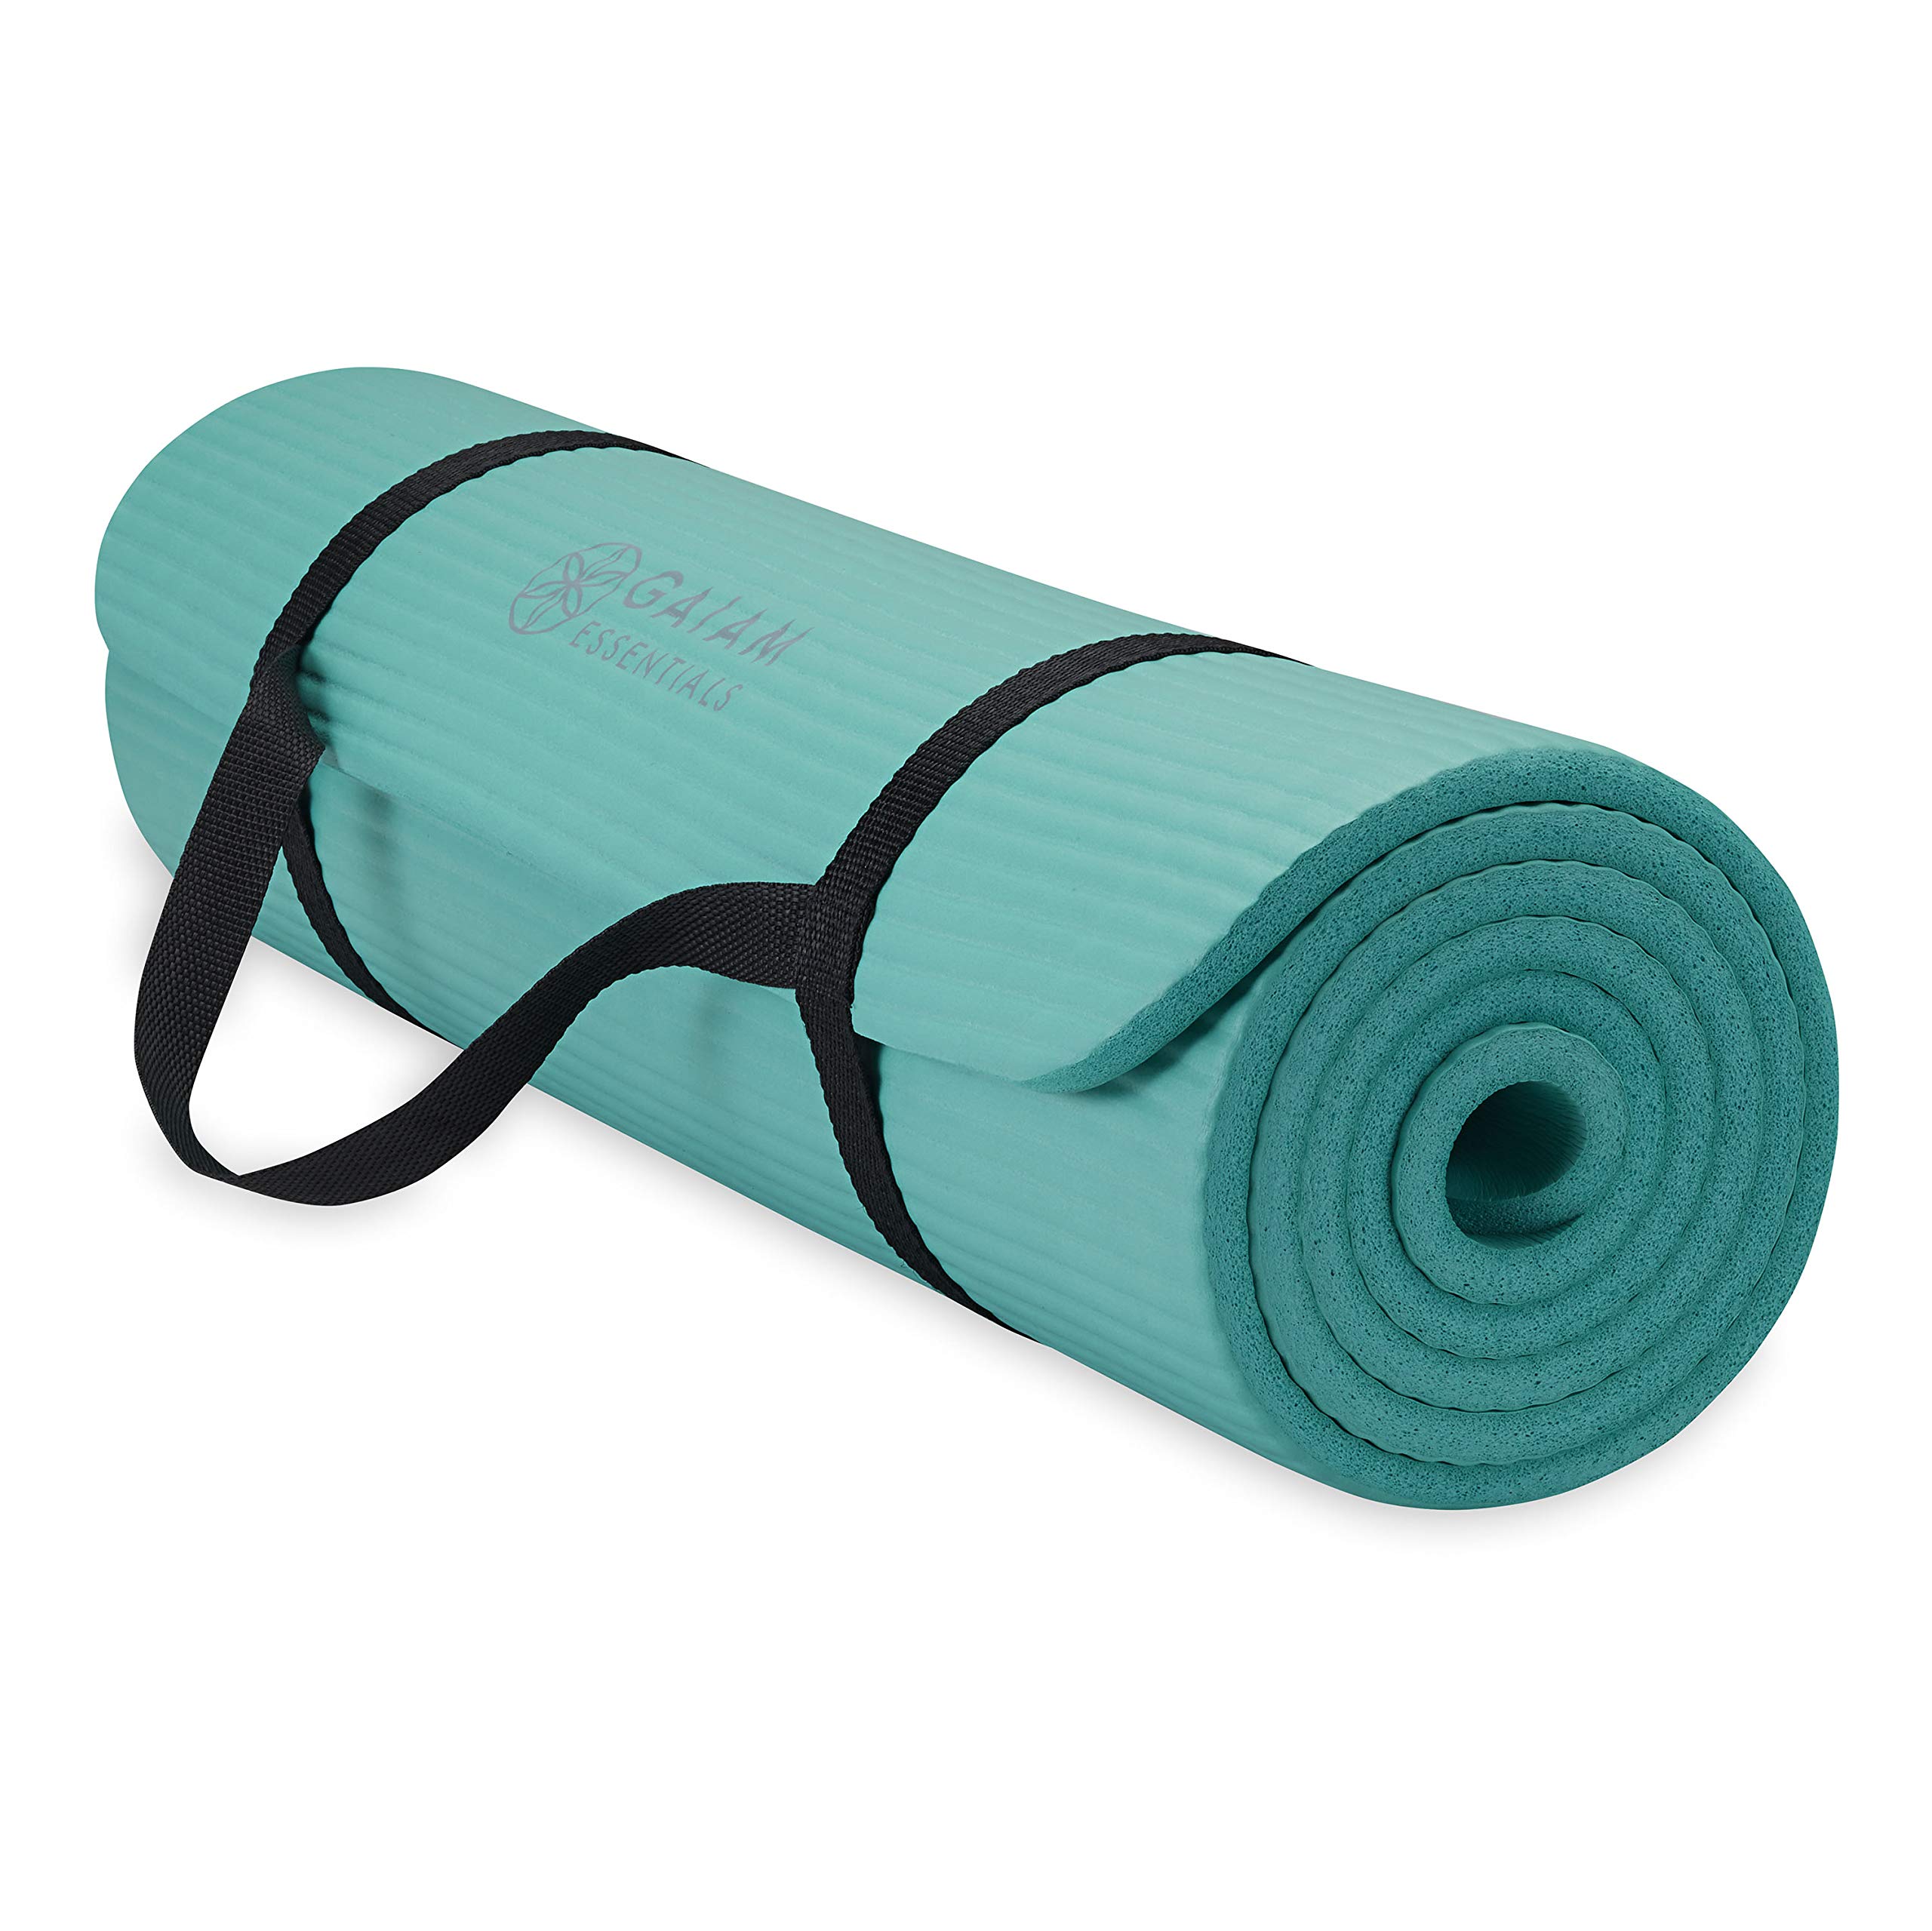 gaiam Essentials Thick Yoga Mat Fitness & Exercise Mat With Easy-cinch carrier Strap, Teal, 72L X 24W X 25 Inch Thick